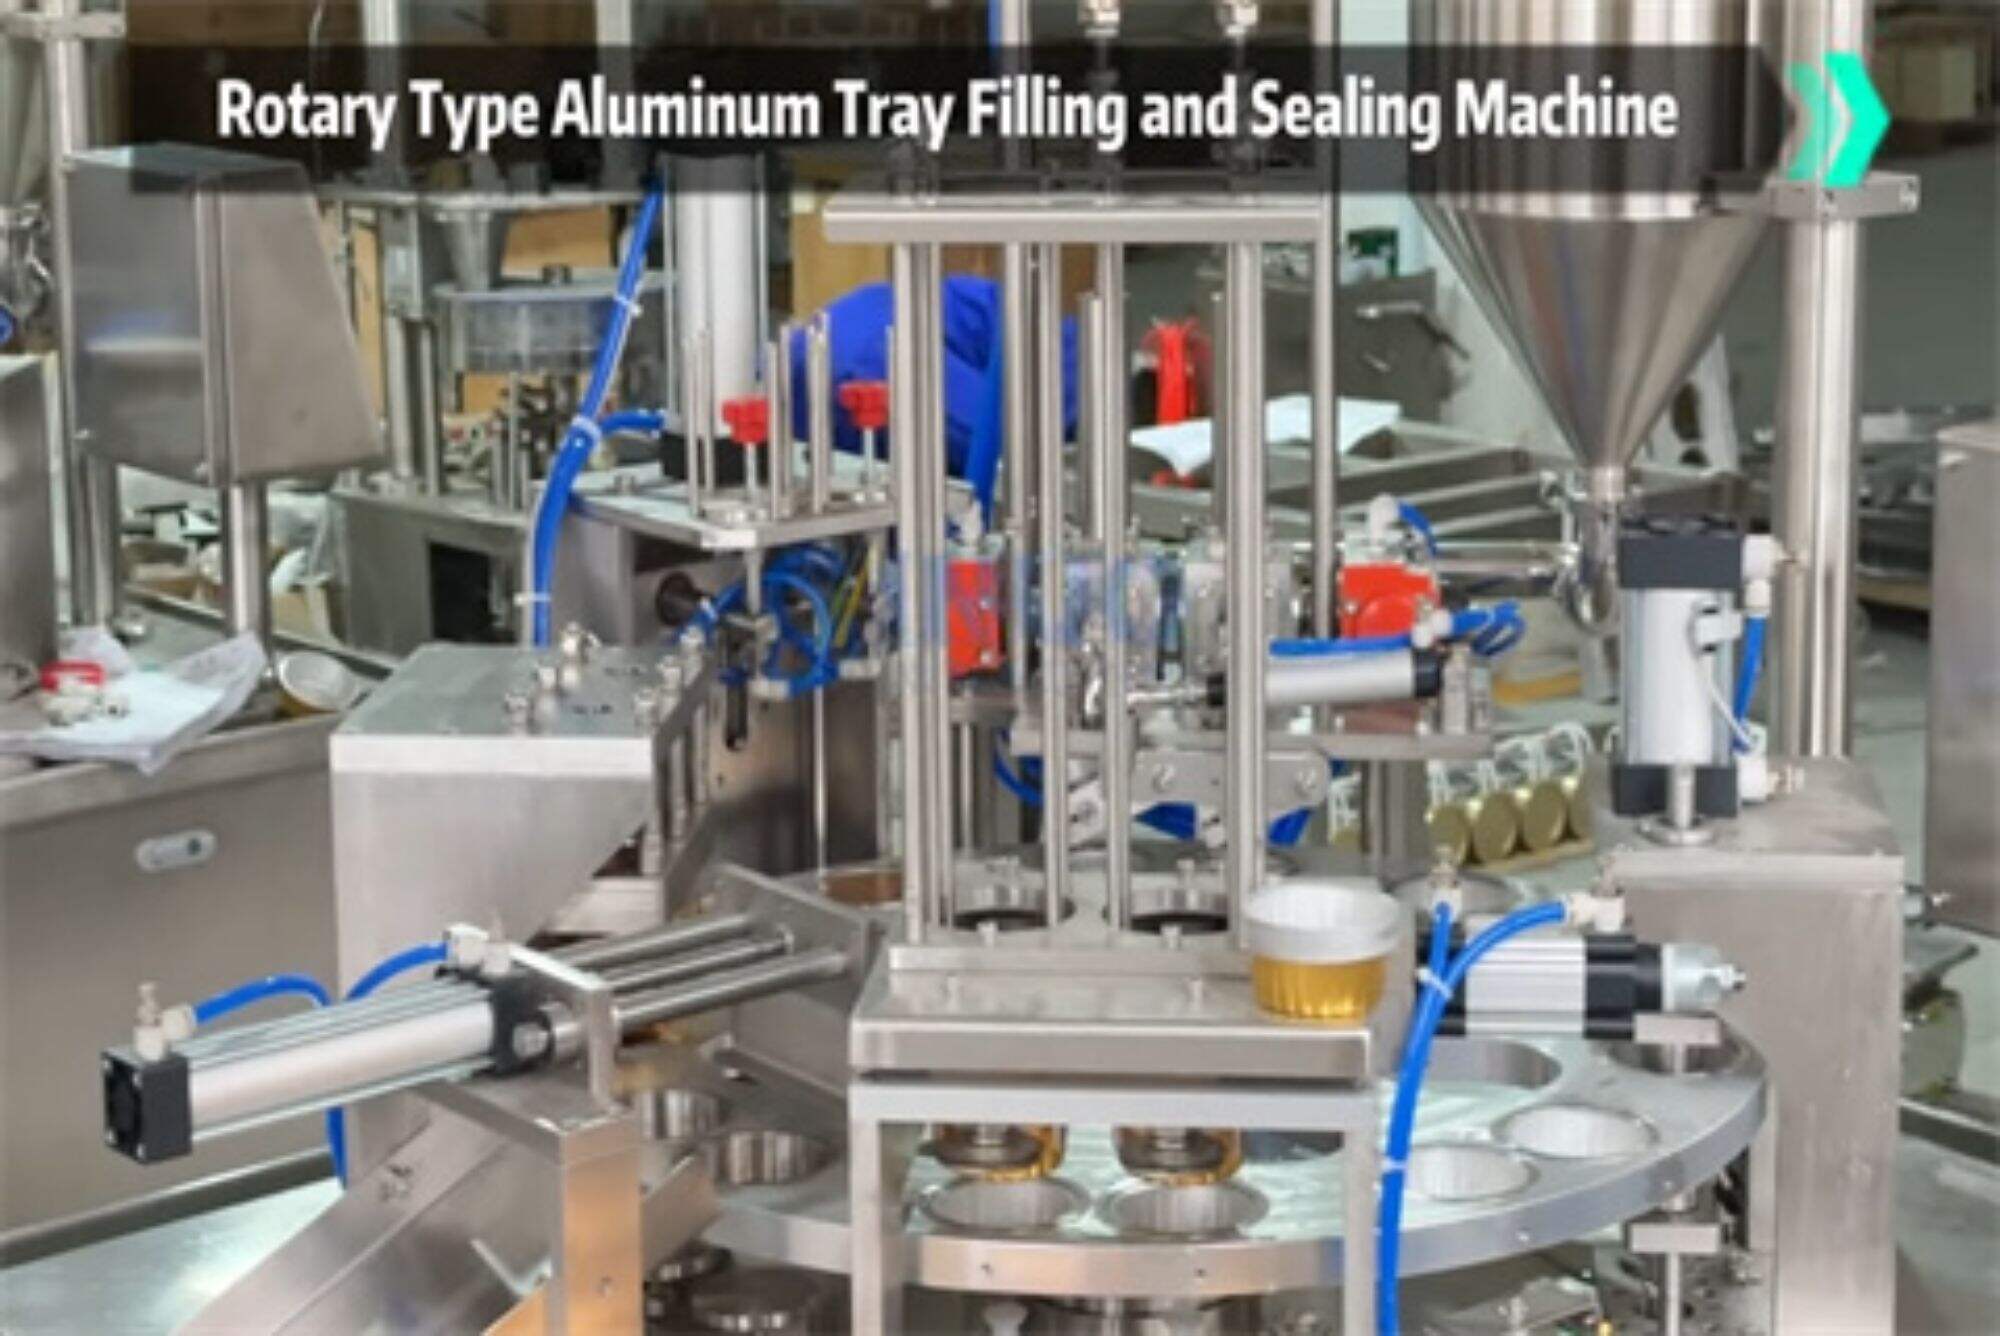 Automatic rotary type aluminum tray filling and sealing machine for minced meat